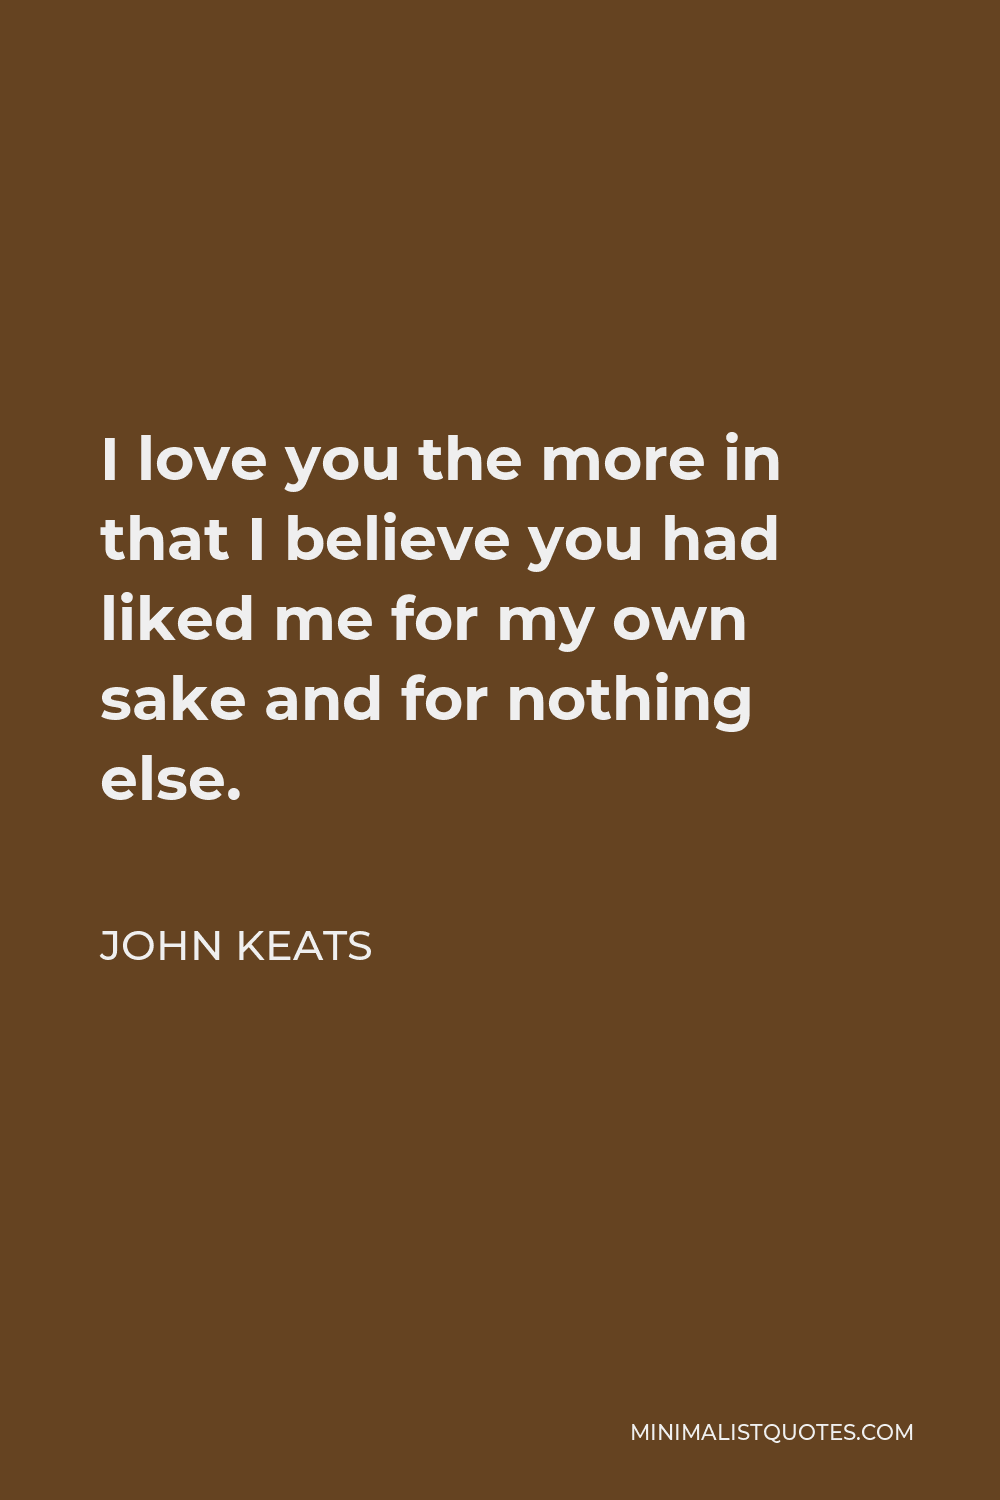 John Keats Quote - I love you the more in that I believe you had liked me for my own sake and for nothing else.